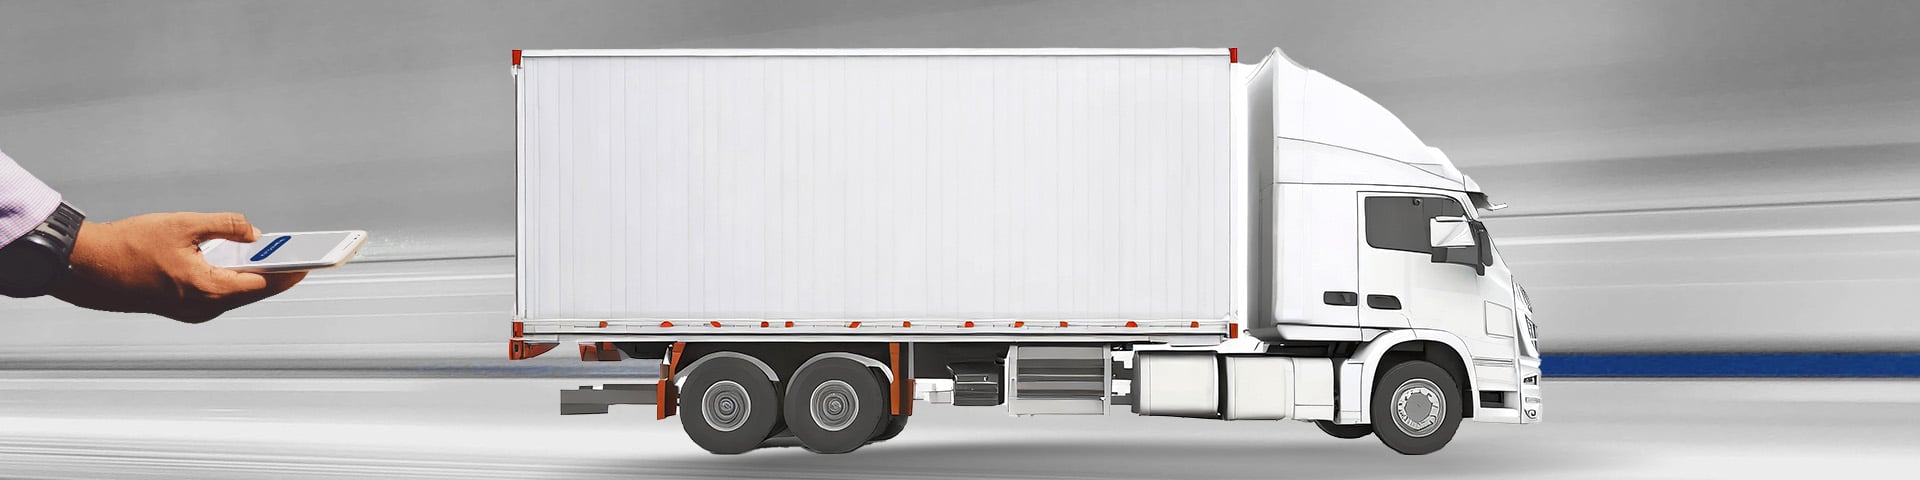 Fast Track truck banner 1920x480